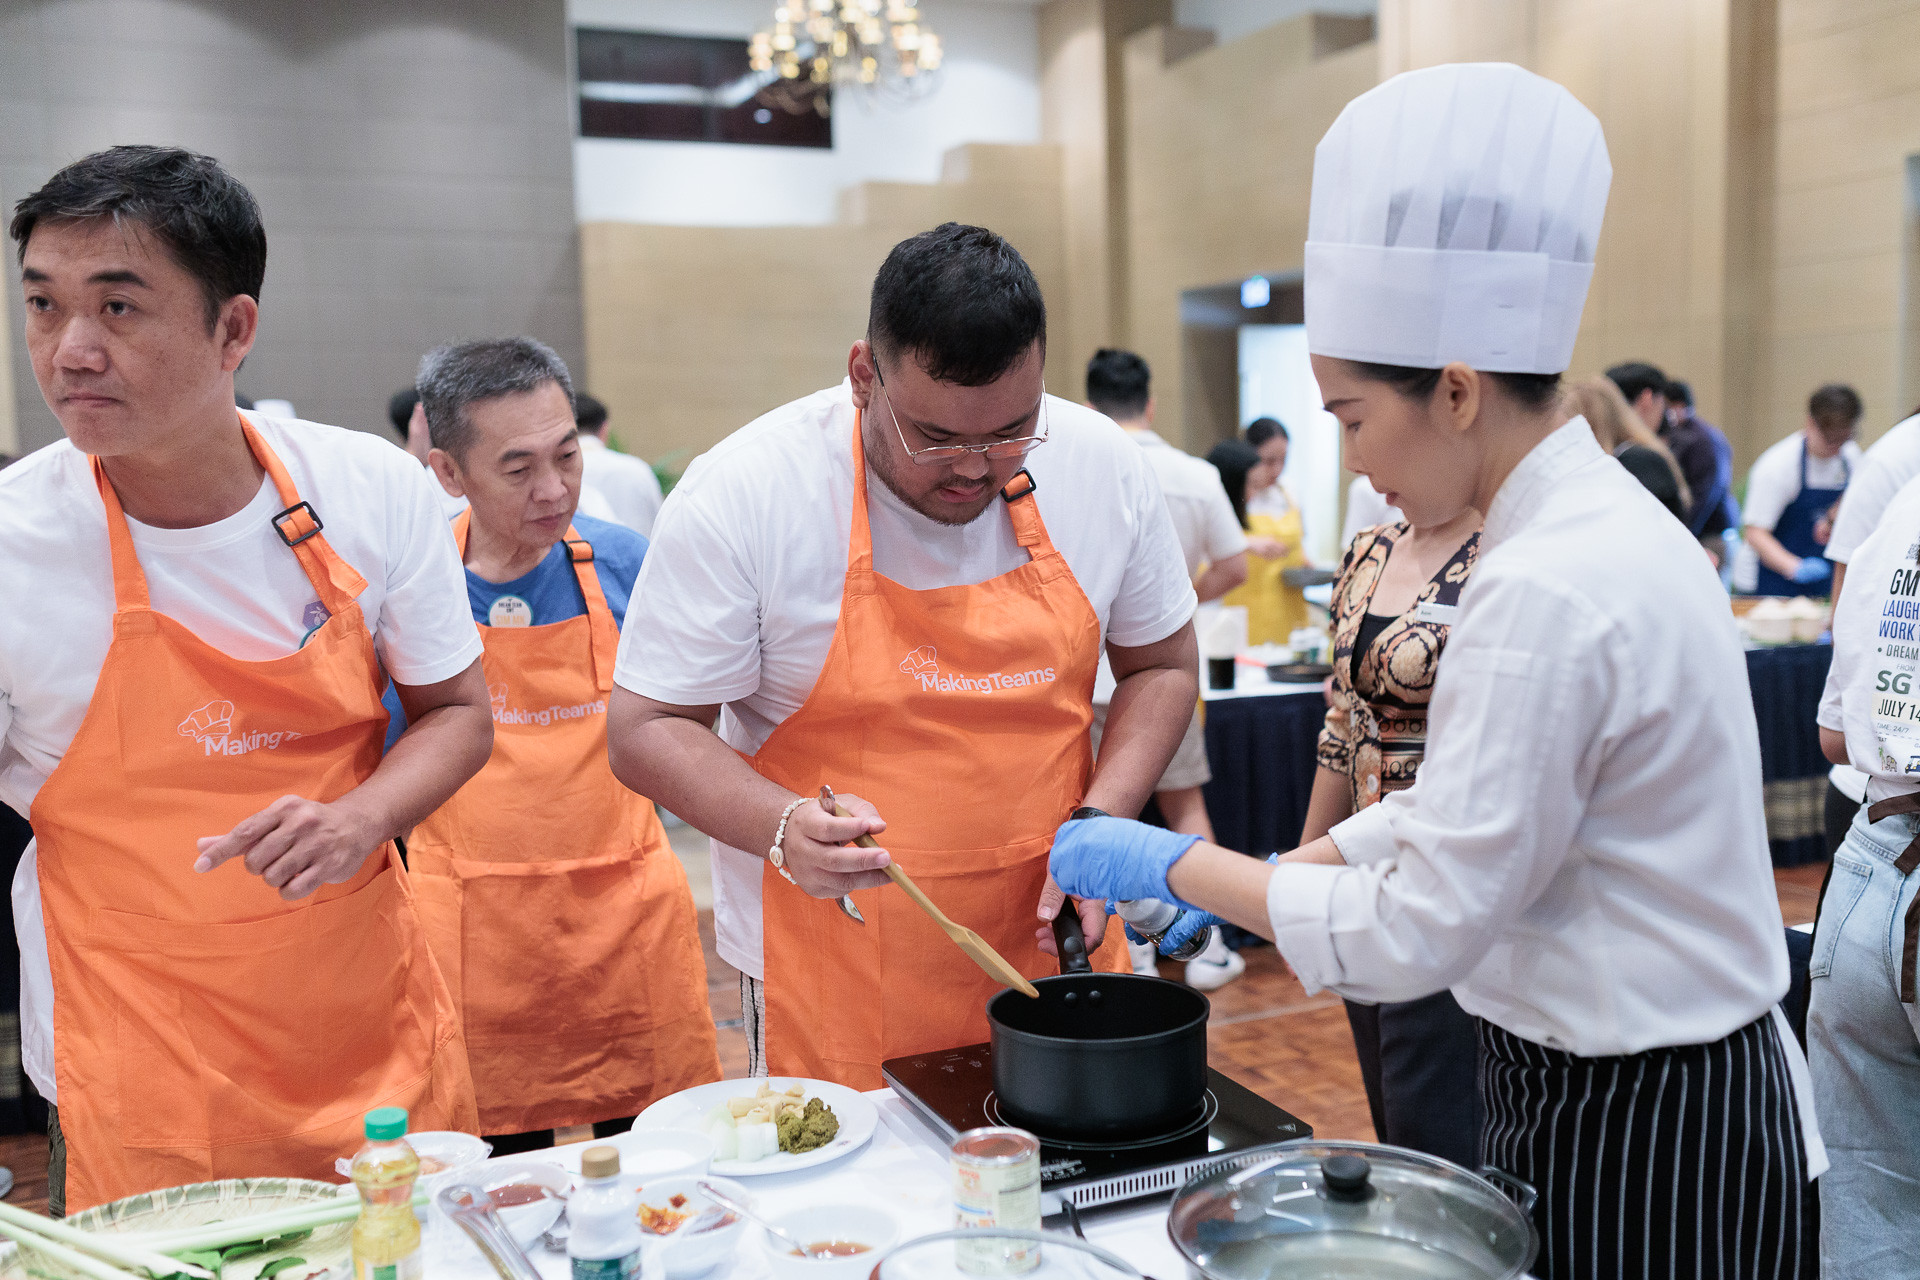 In this inspiring team building activity teams compete against each other in various rounds always observed coached and judged by their Michelin-star instructor